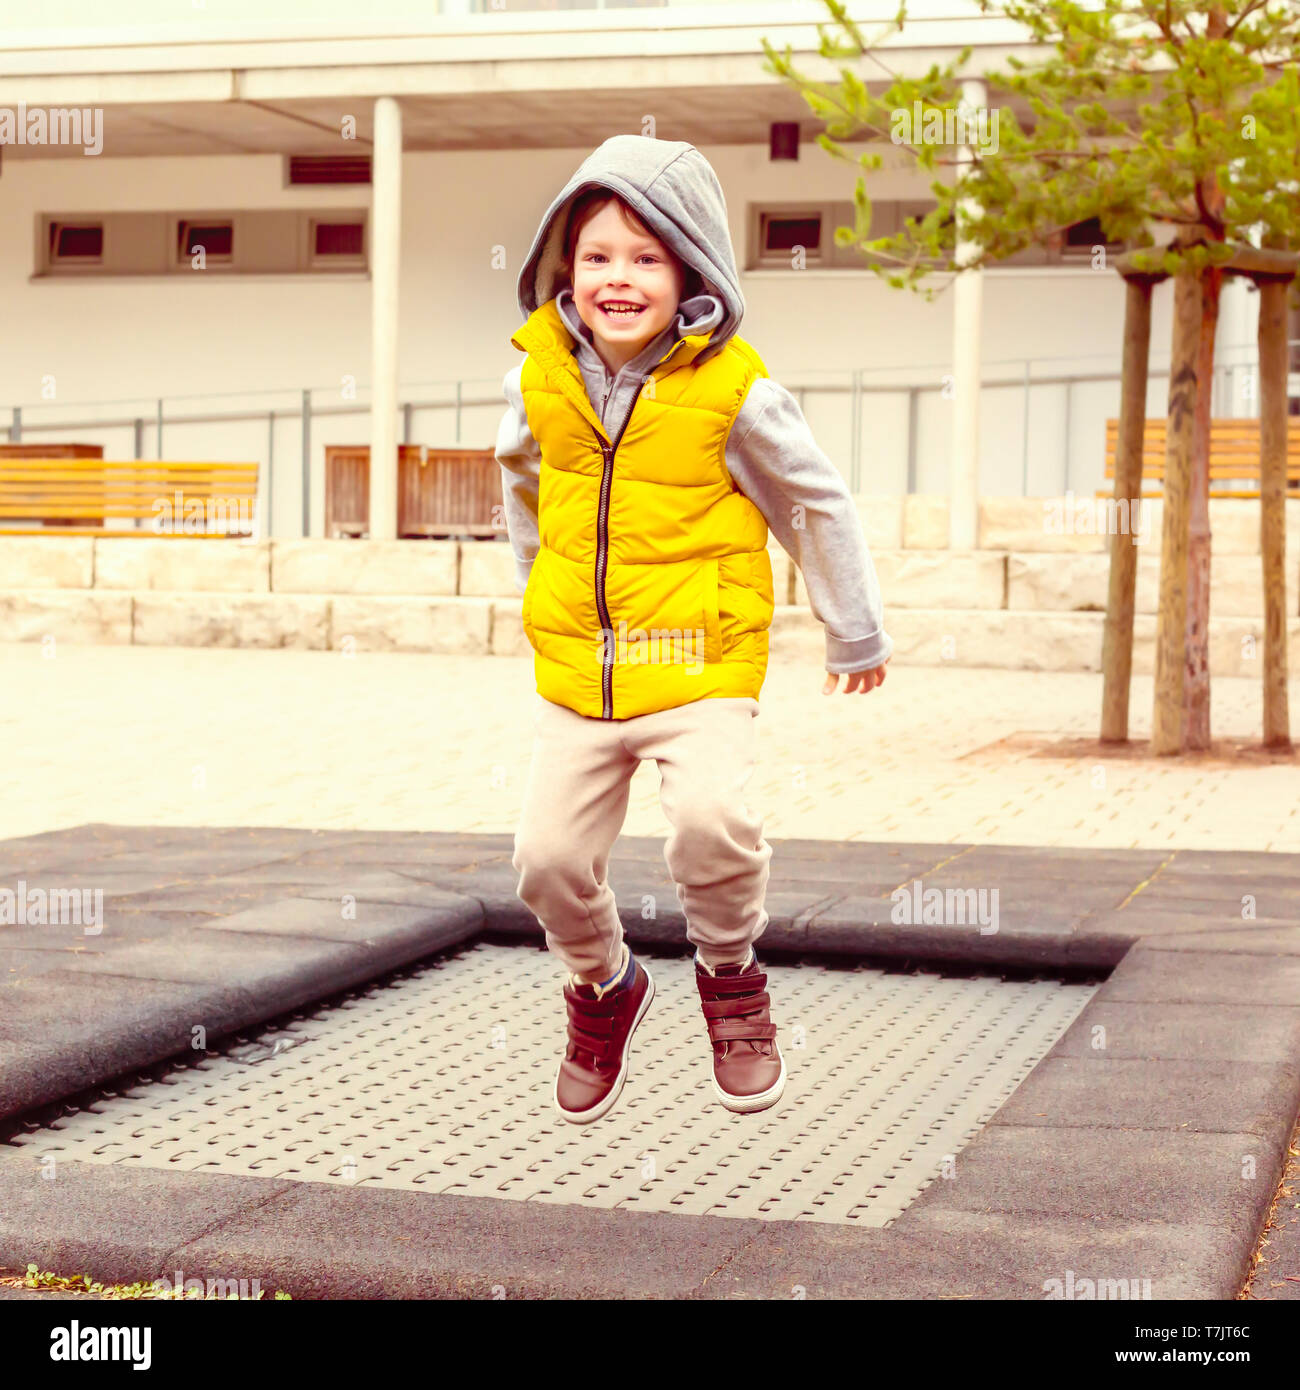 Happy child, active five year old boy plays outdoors in playground jumping high in the sky on trampoline Stock Photo